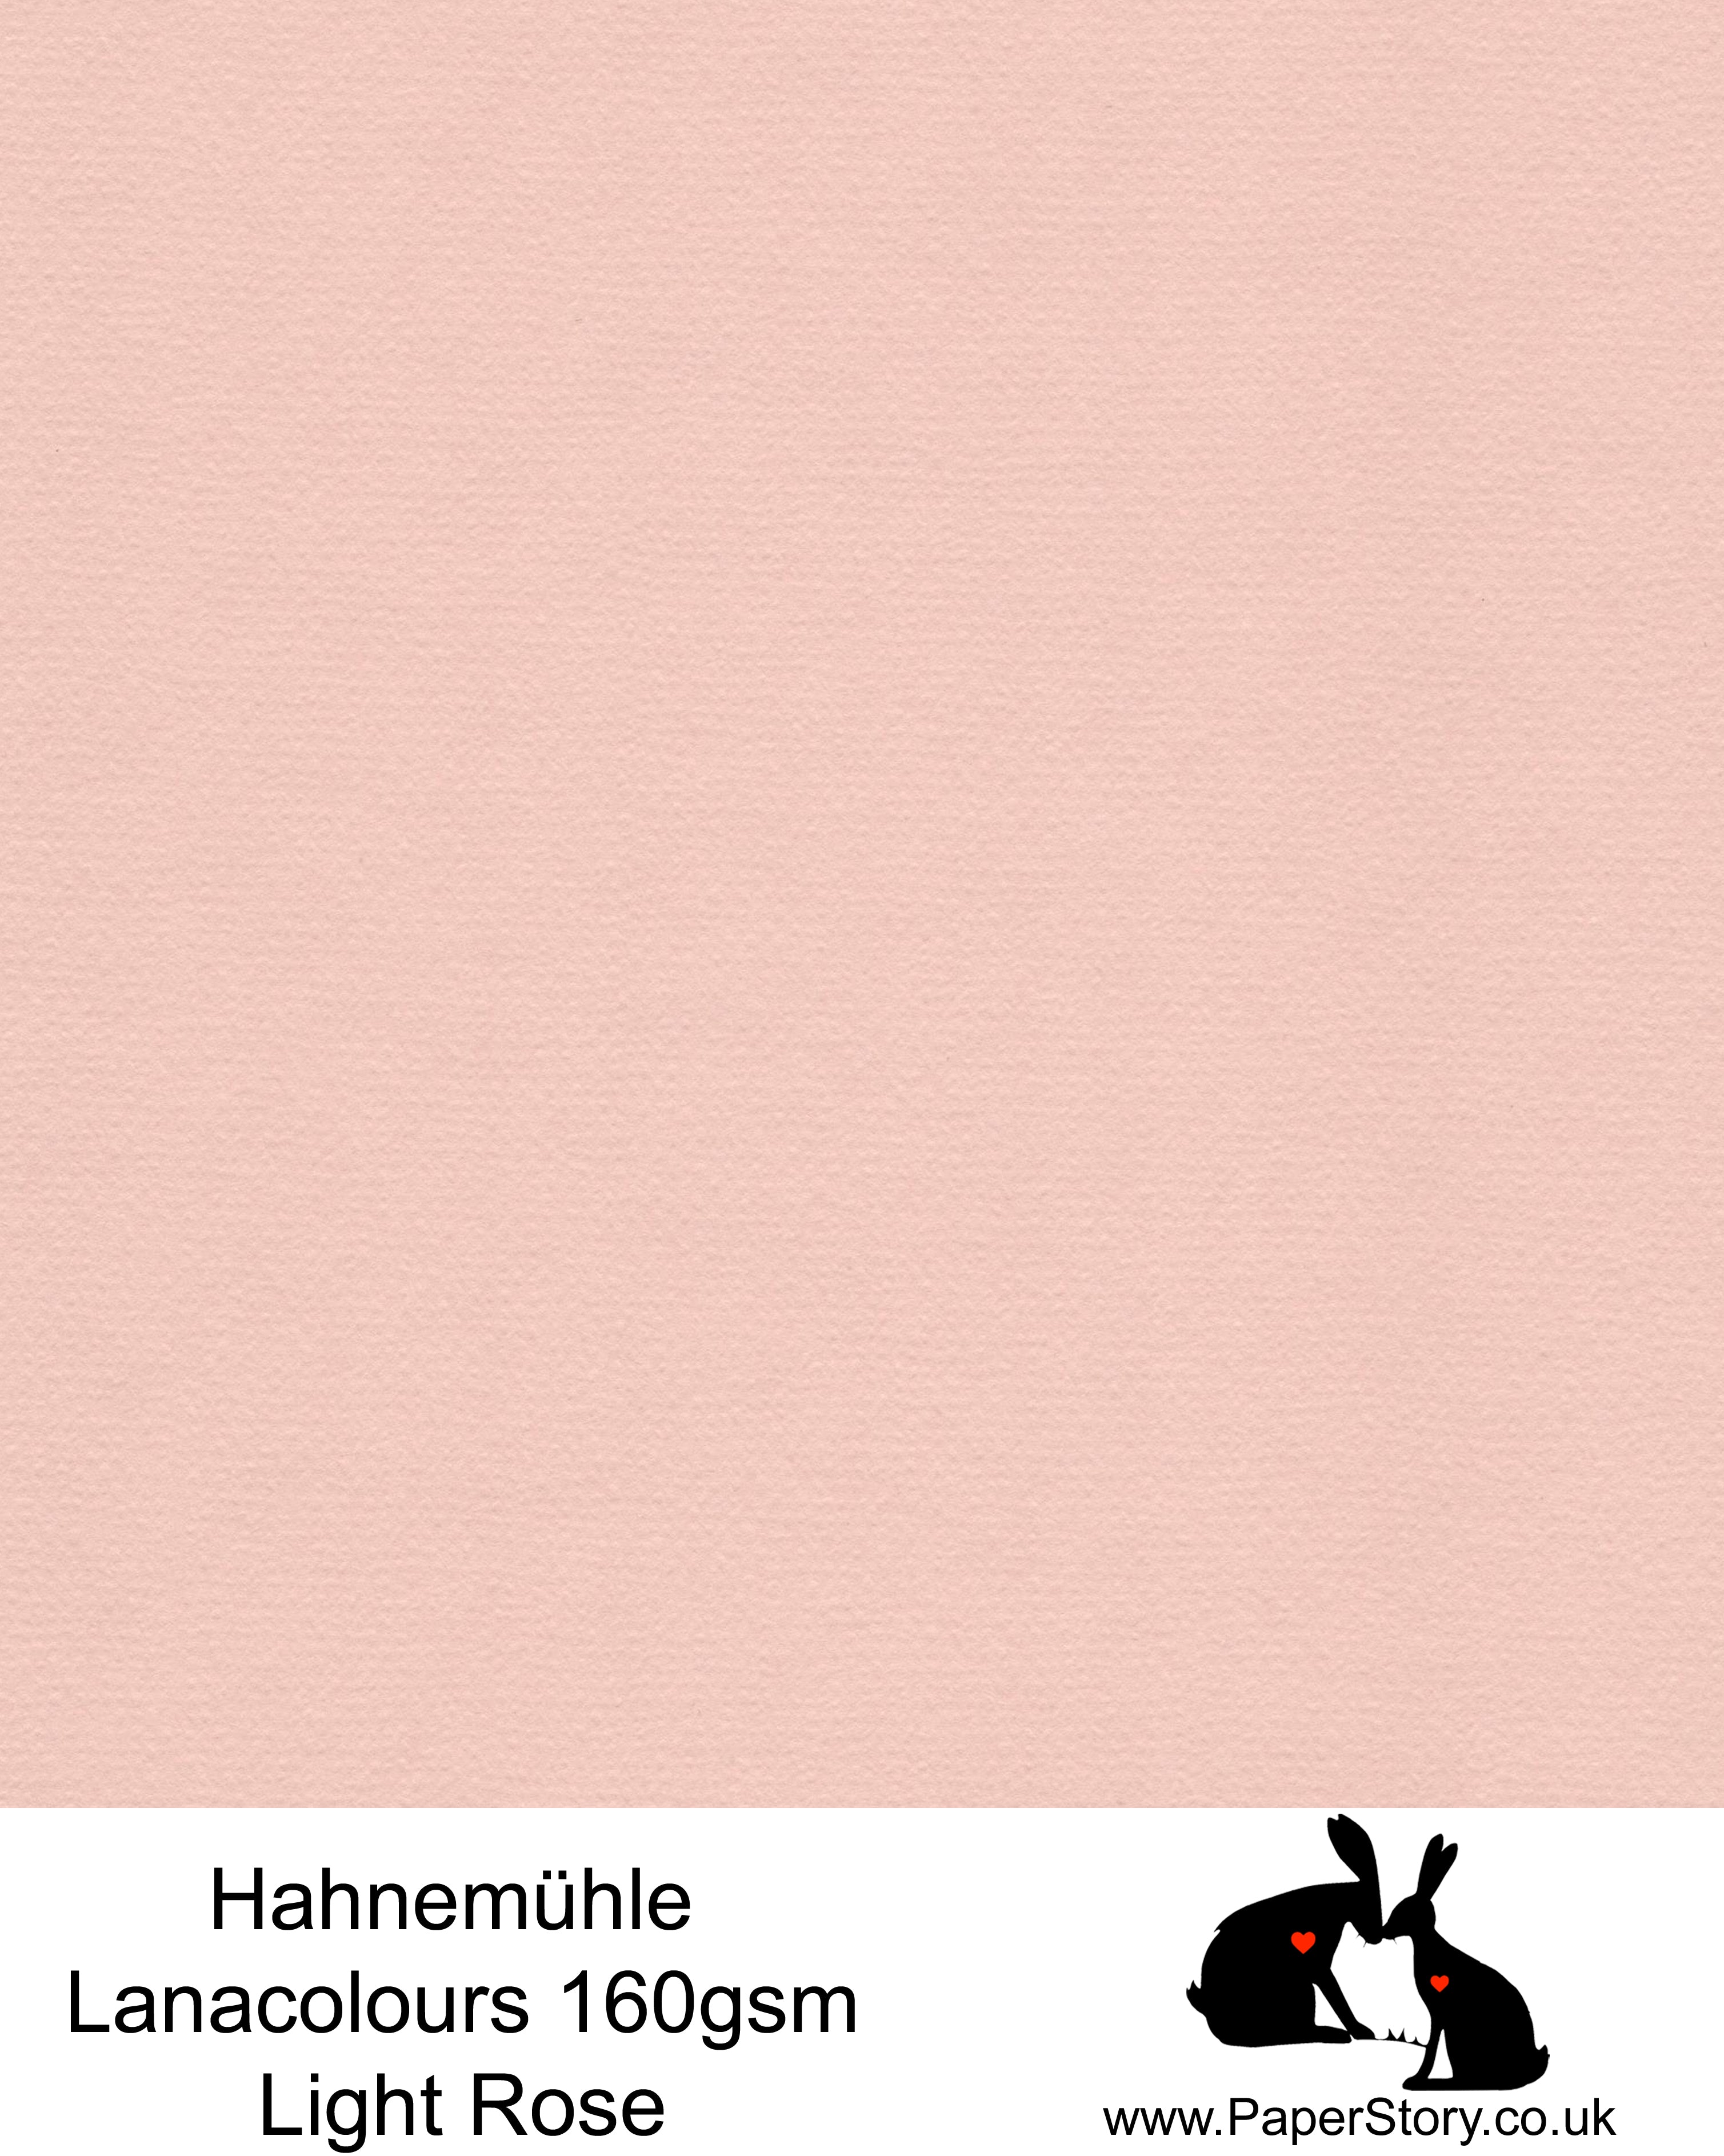 Hahnemühle Lana Colours pastel Light Rose, soft pink hammered paper 160 gsm. Artist Premium Pastel and Papercutting Papers 160 gsm often described as hammered paper.